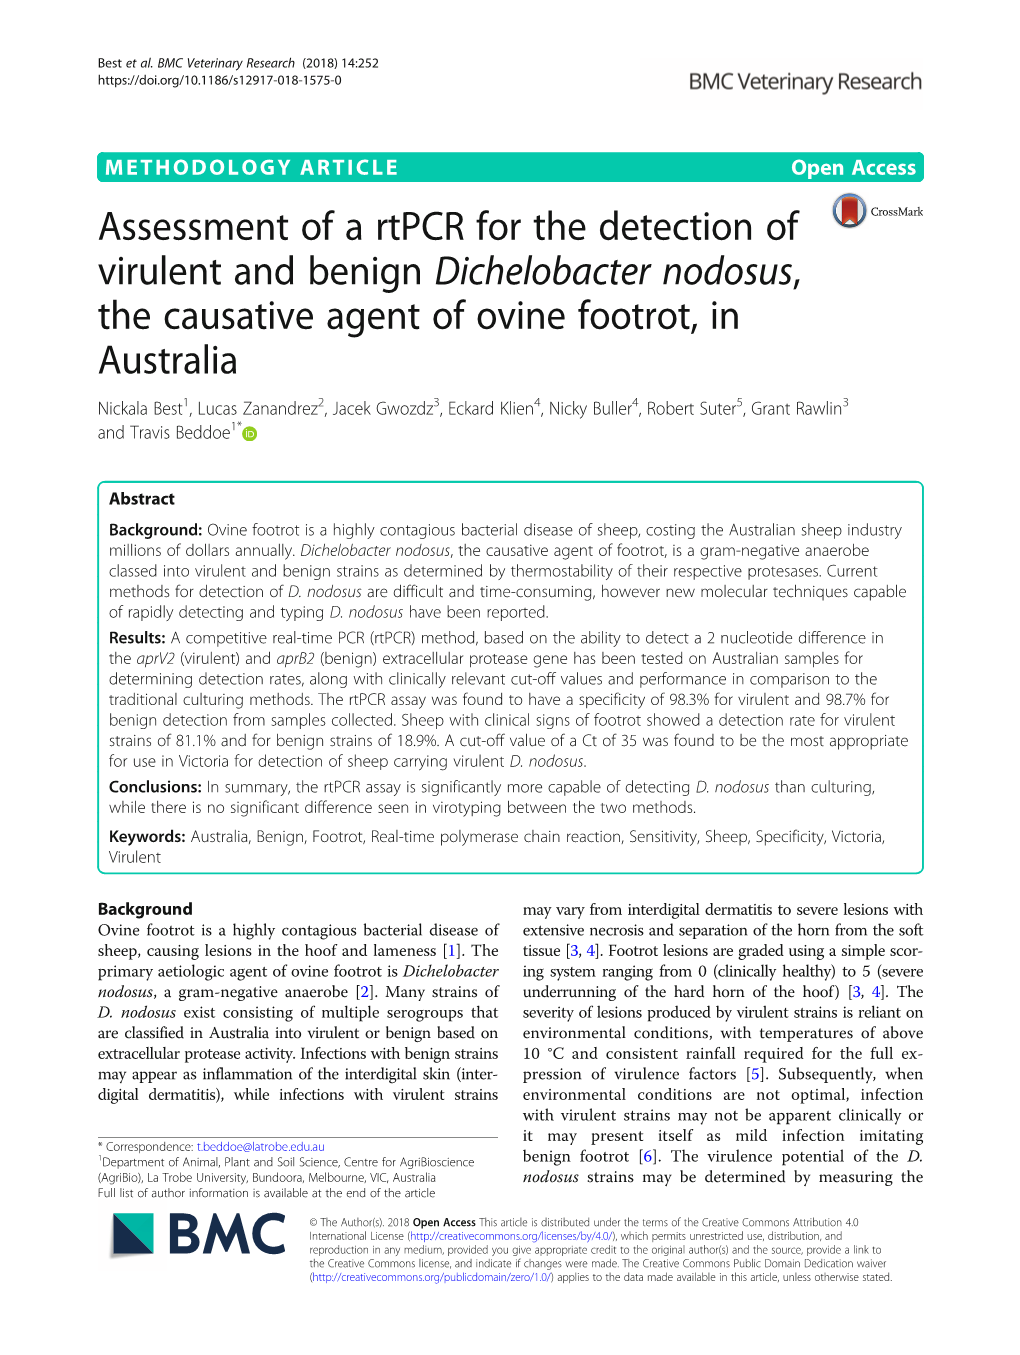 Assessment of a Rtpcr for the Detection of Virulent and Benign Dichelobacter Nodosus, the Causative Agent of Ovine Footrot, in A